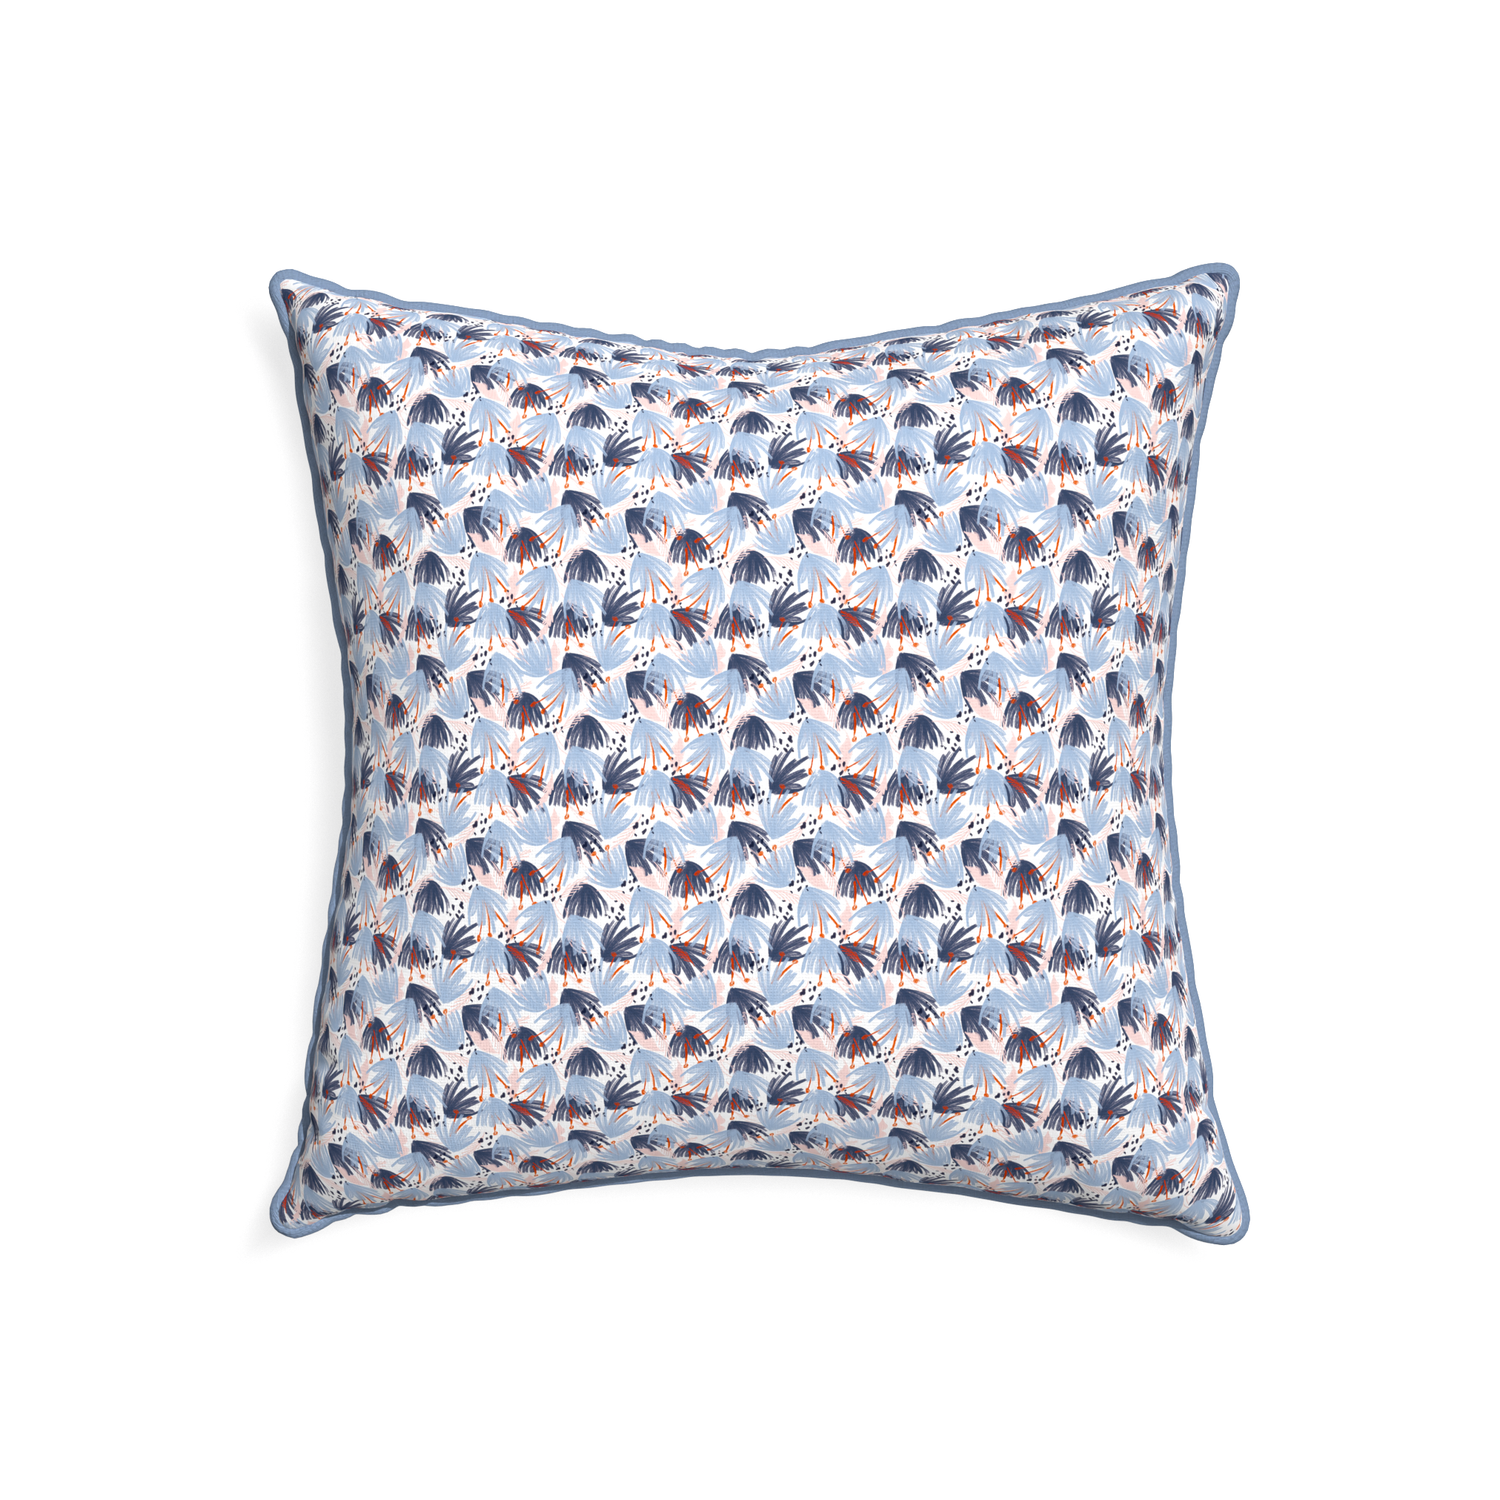 22-square eden blue custom pillow with sky piping on white background